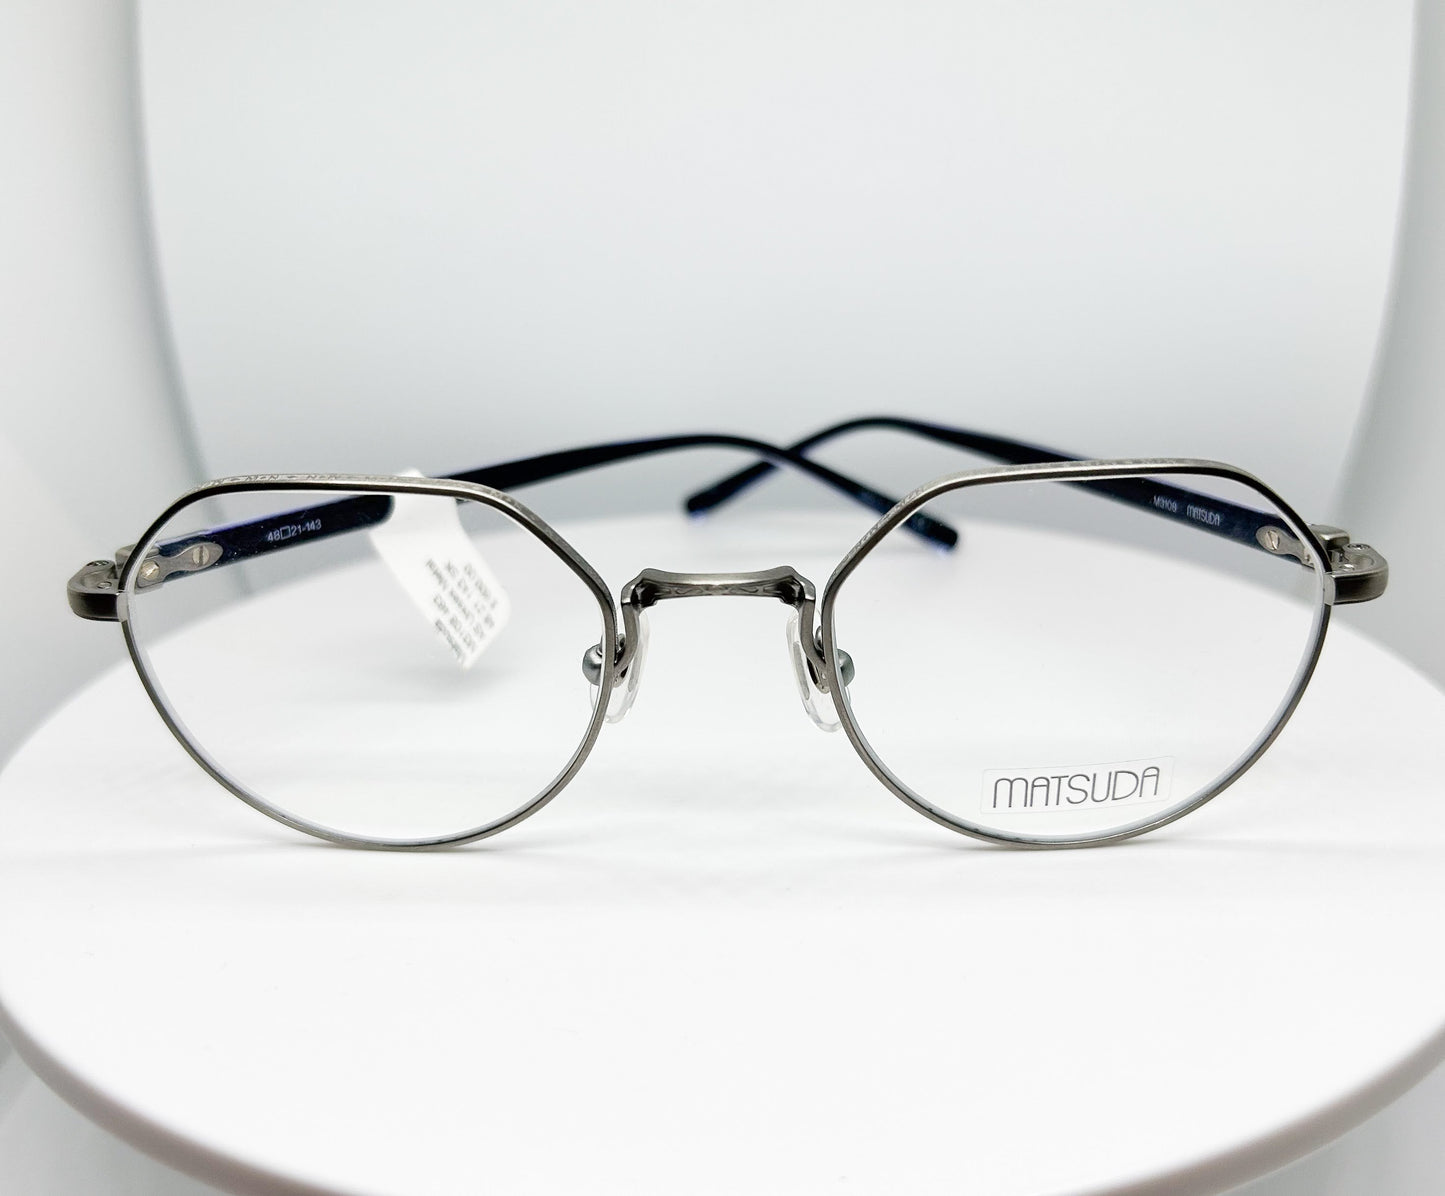 <p>Matsuda M3108 is a  Silver & Blue, Titanium Optical Frame with a Panto shape.</p><p>Shop with confidence from Adair Eyewear, a MATSUDA Authorized Dealer.  We have provided the best in customer service and great designer eyweear for over 40 years.</p>